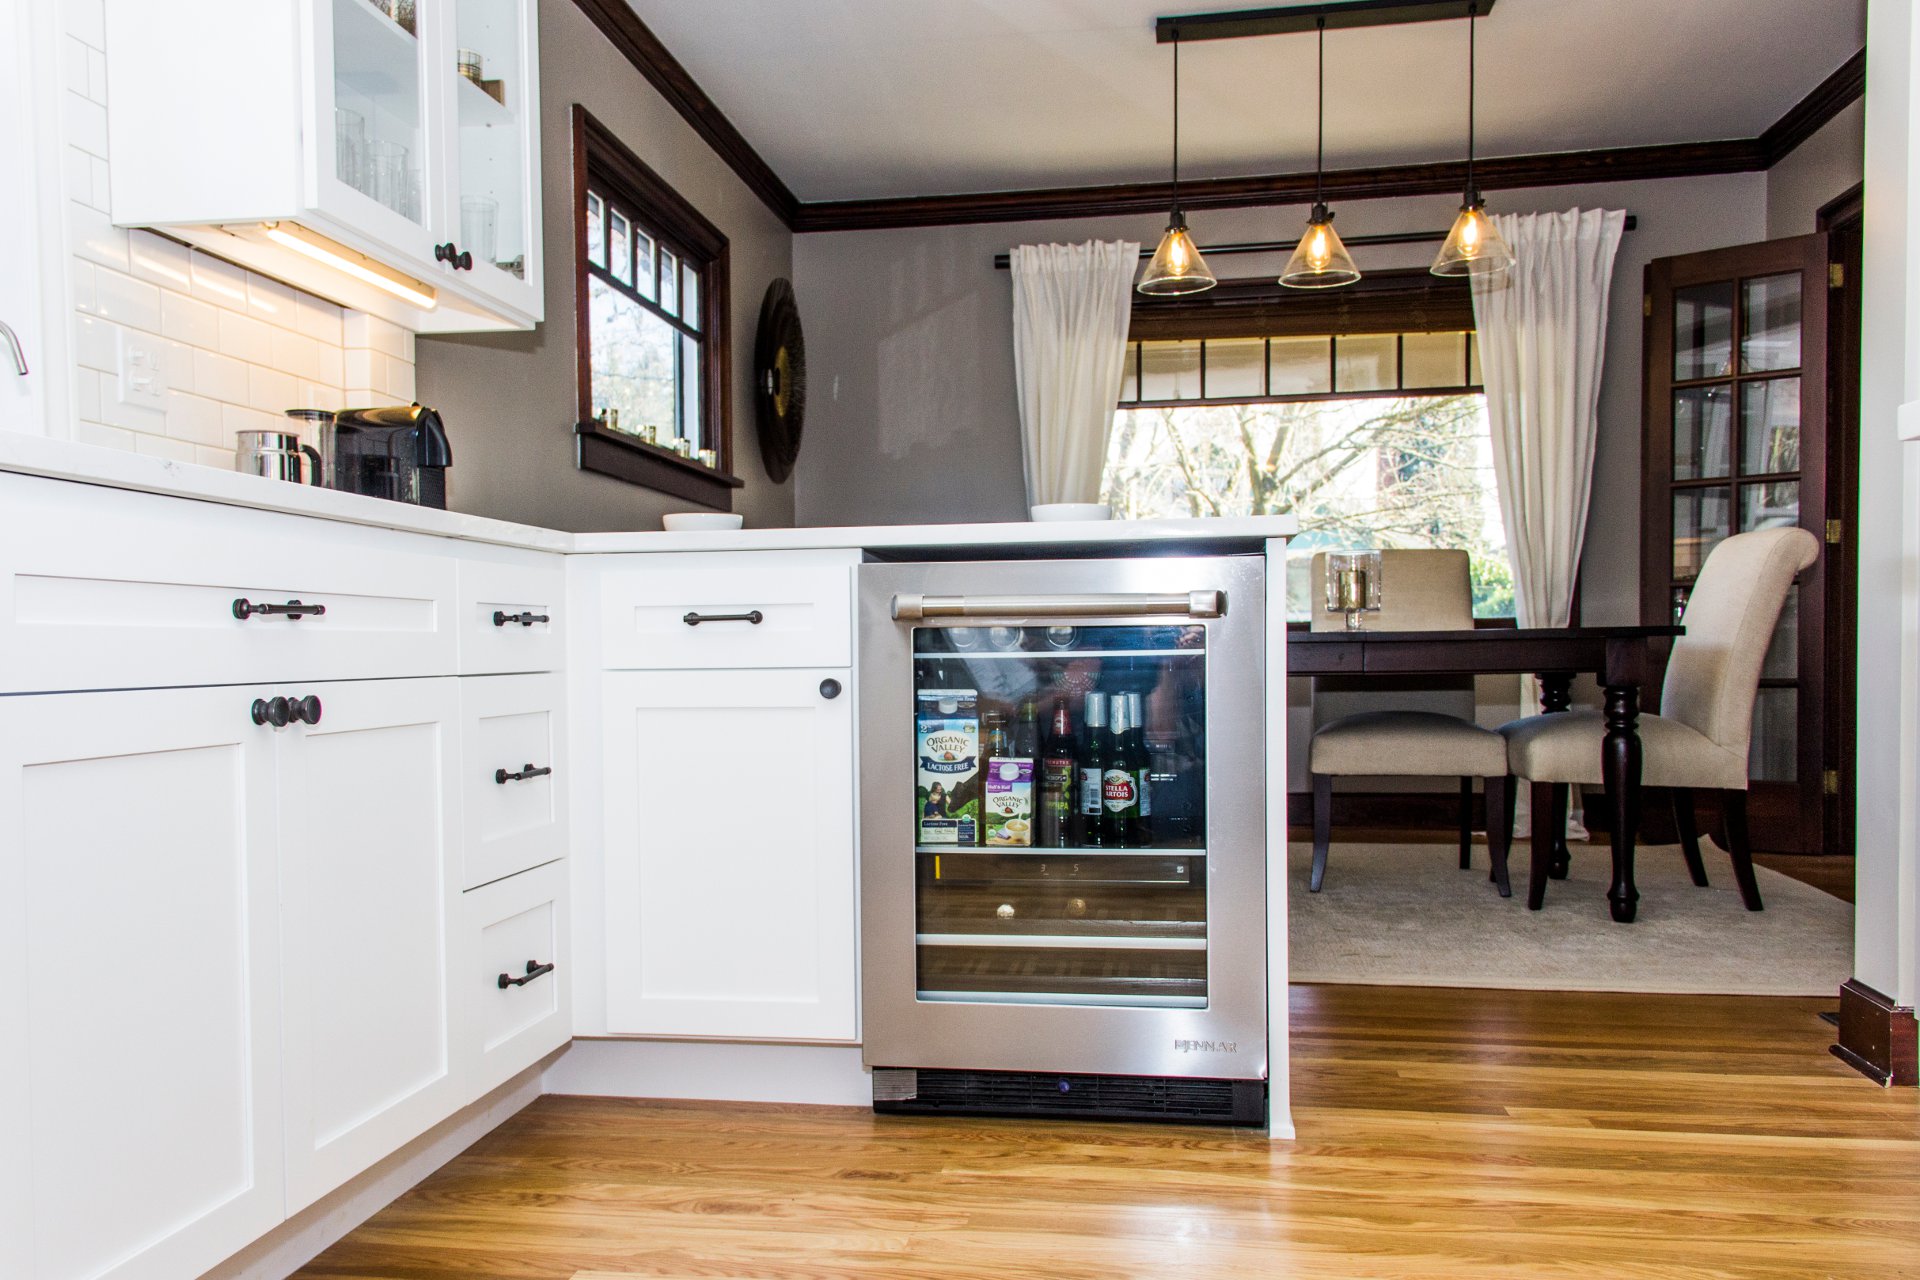 White kitchen cabinets and a custom wine cooler